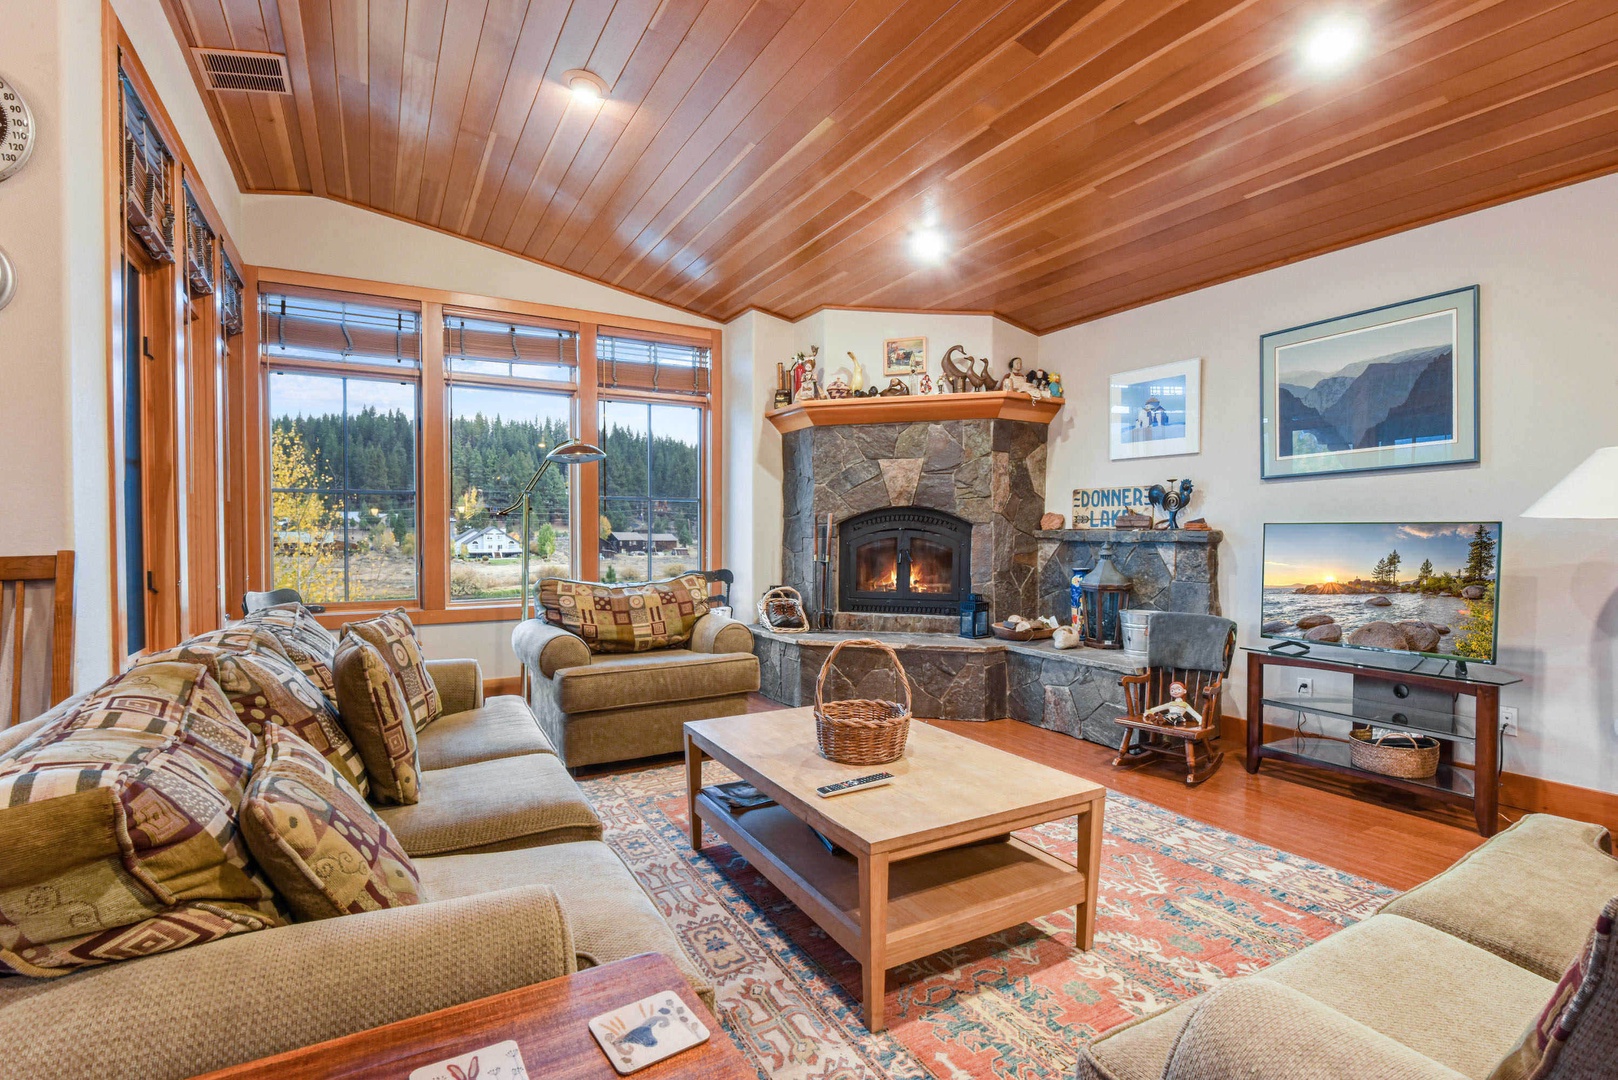 Living room with wood burning fireplace, flat screen TV and mountain views